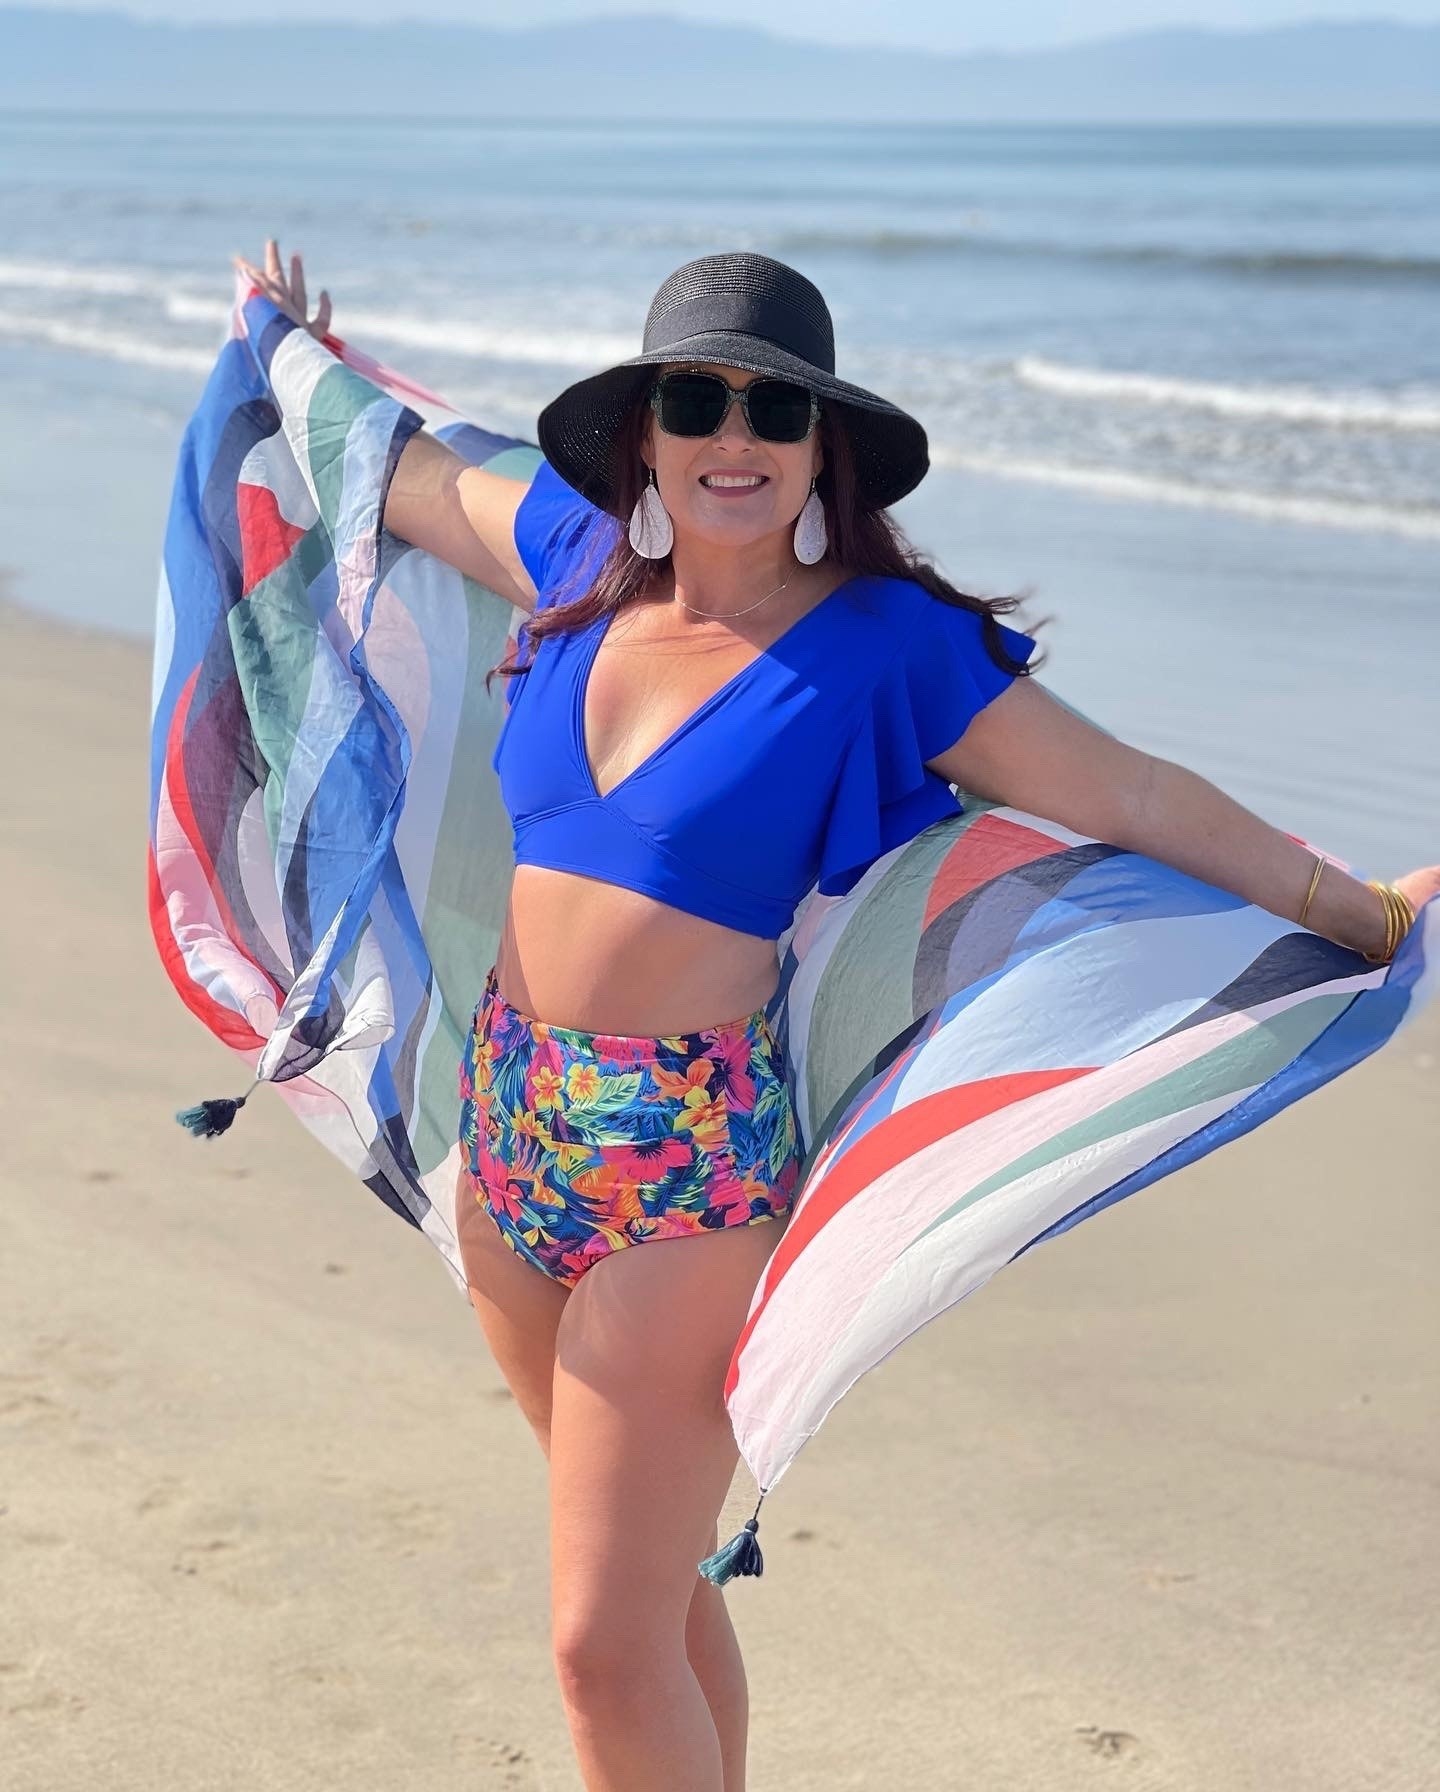 Bathing Suits You'll Be Excited To Wear This Beach Season - Society19